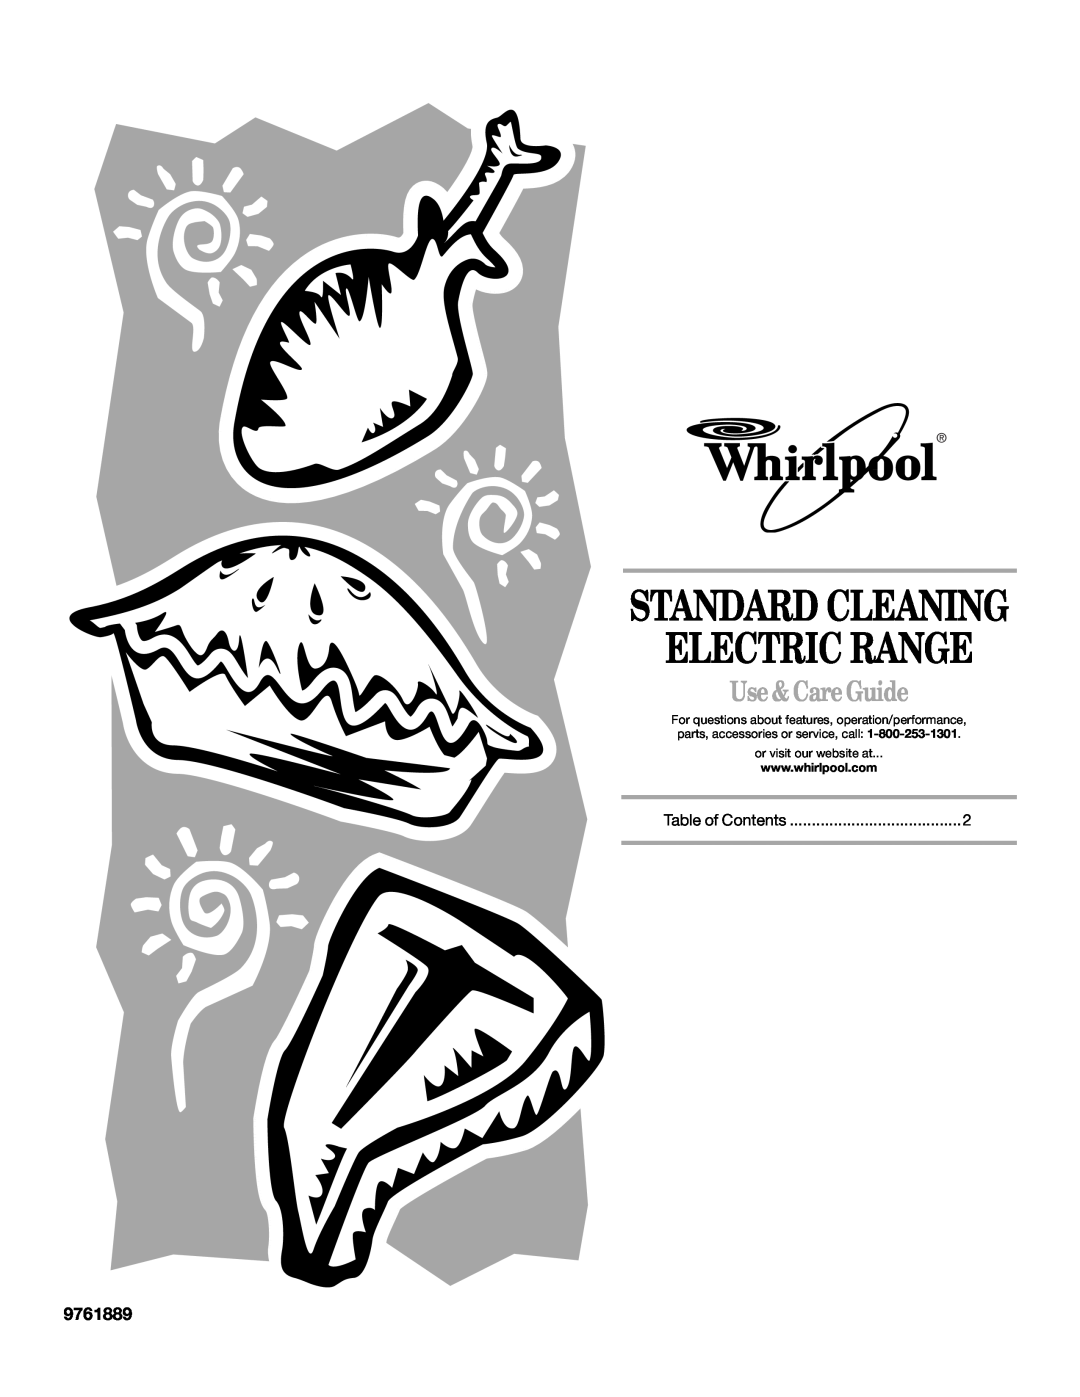 Whirlpool RF3020XKQ2 manual 9761889, Standard Cleaning Electric Range, Use &Care Guide, or visit our website at 